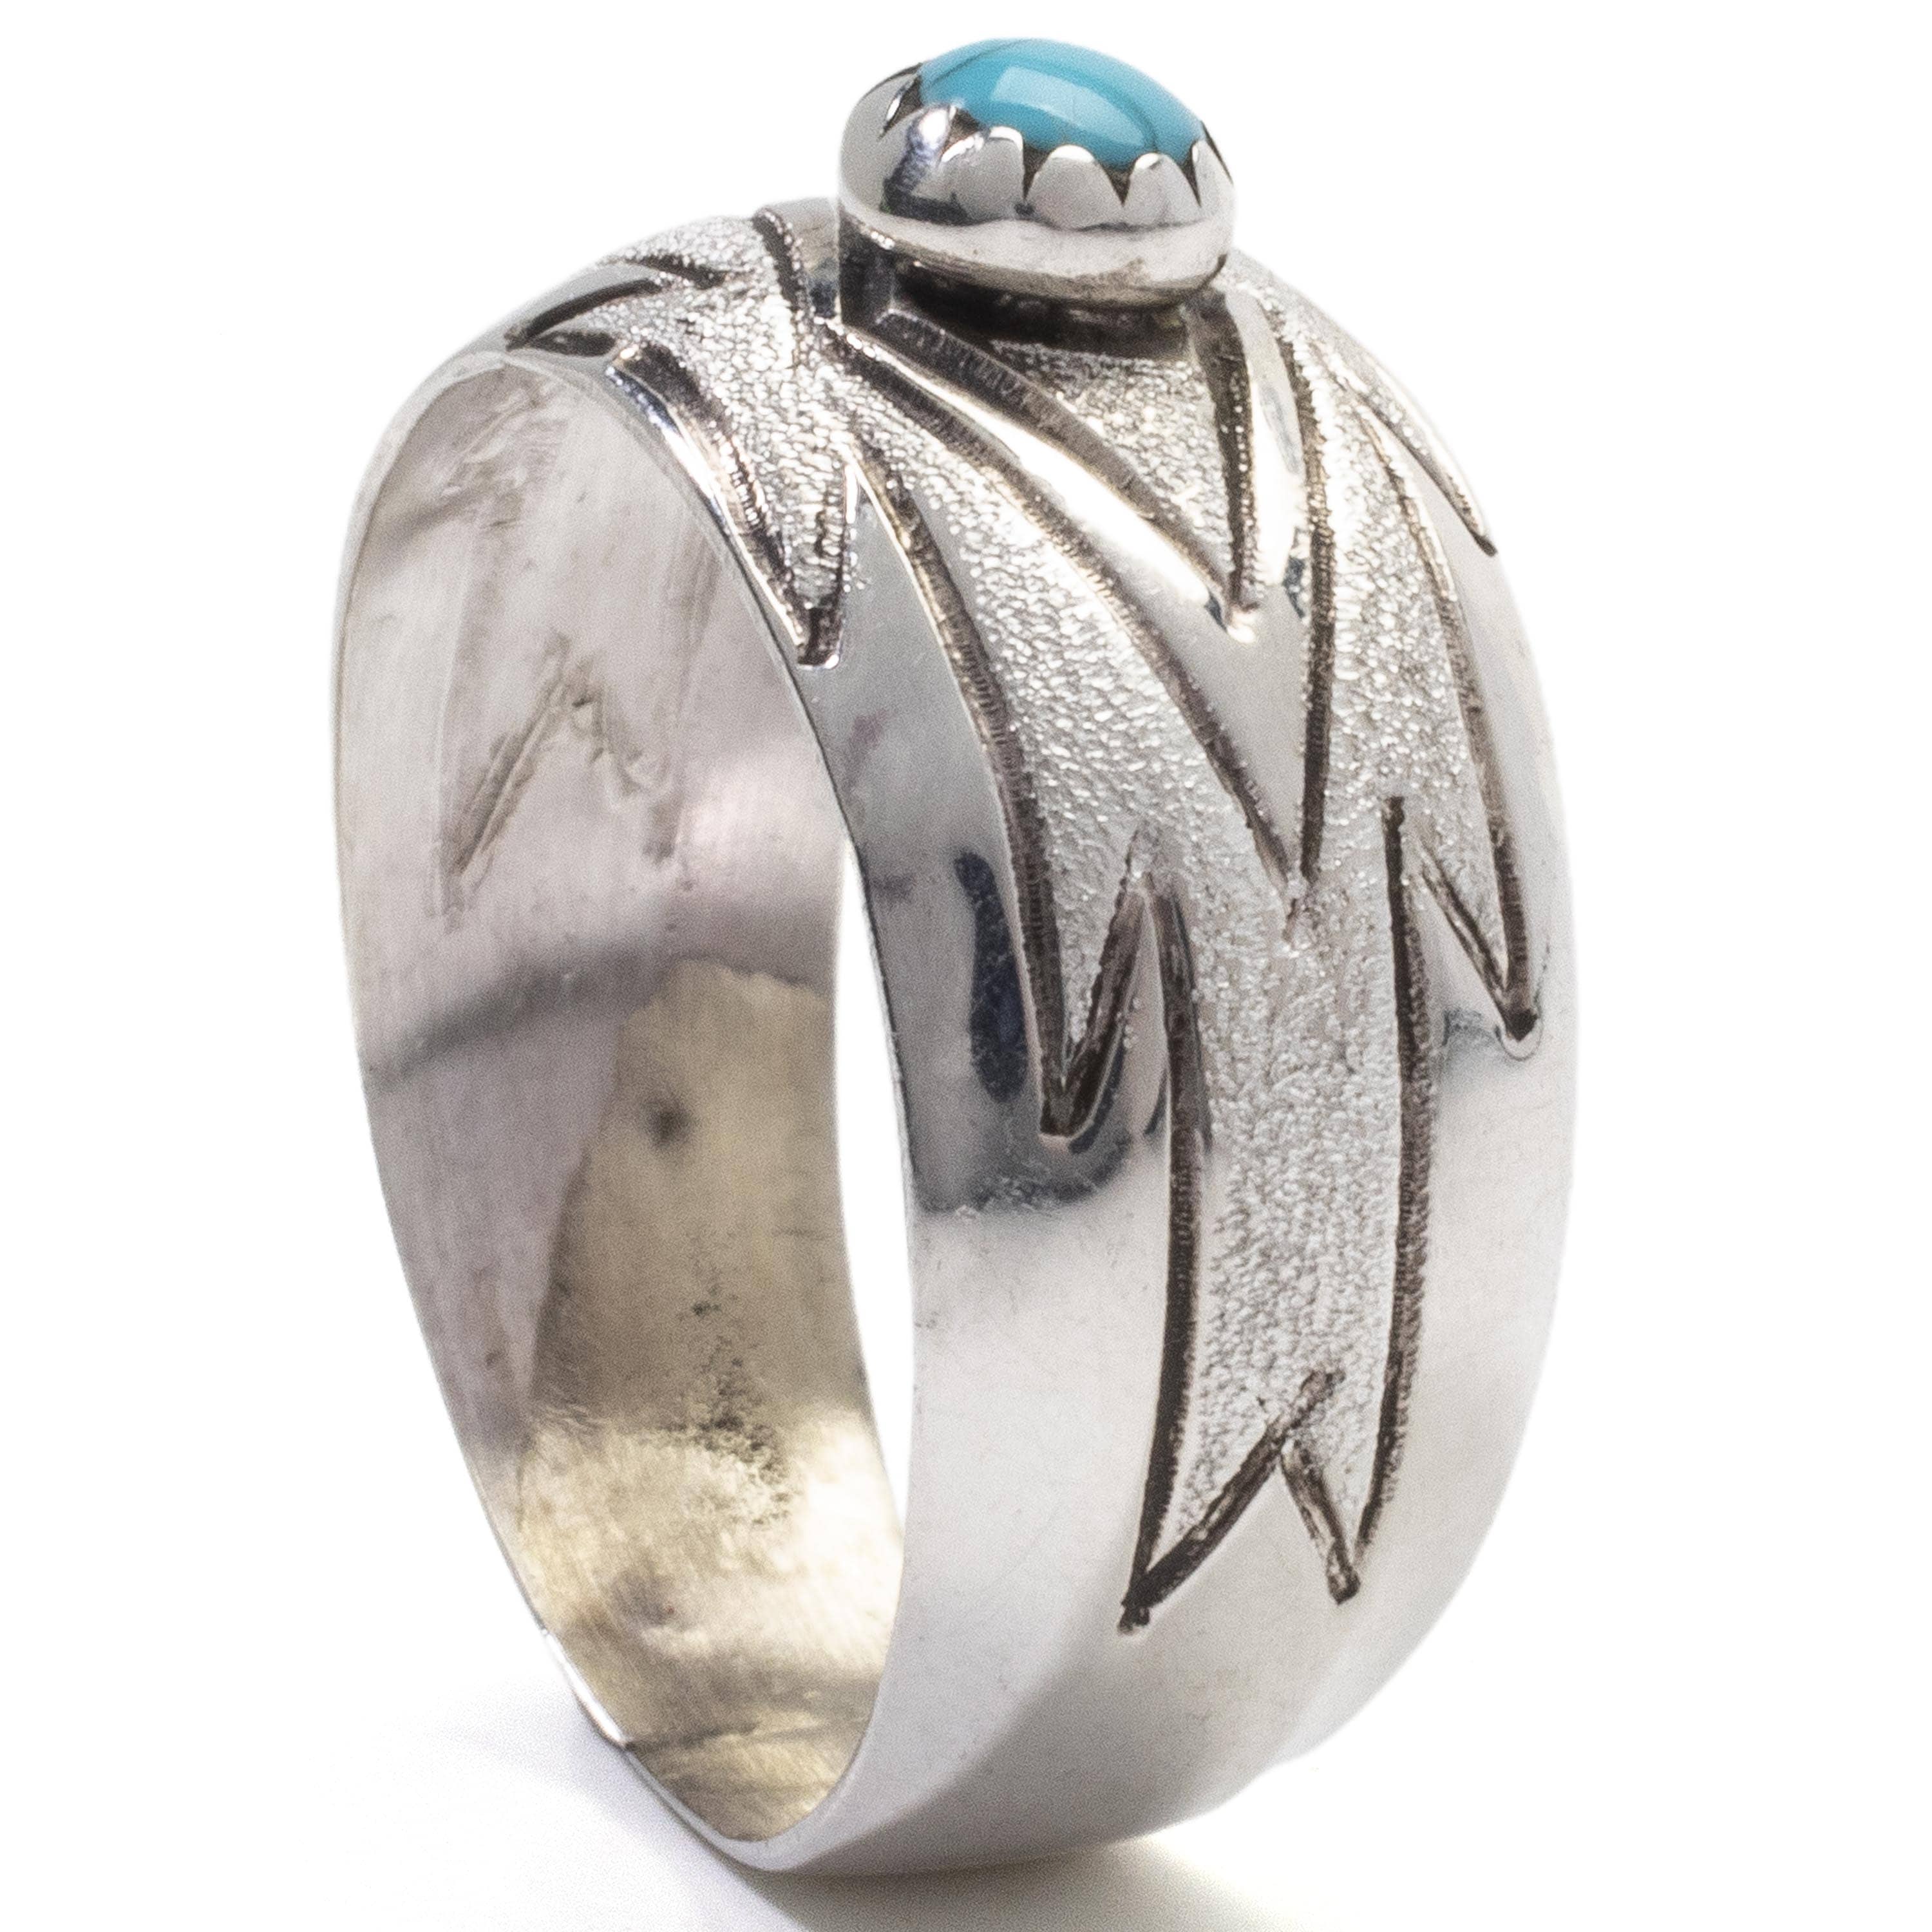 Kalifano Native American Jewelry Florence Tahe Navajo Kingman Turquoise USA Native American Made 925 Sterling Silver Ring